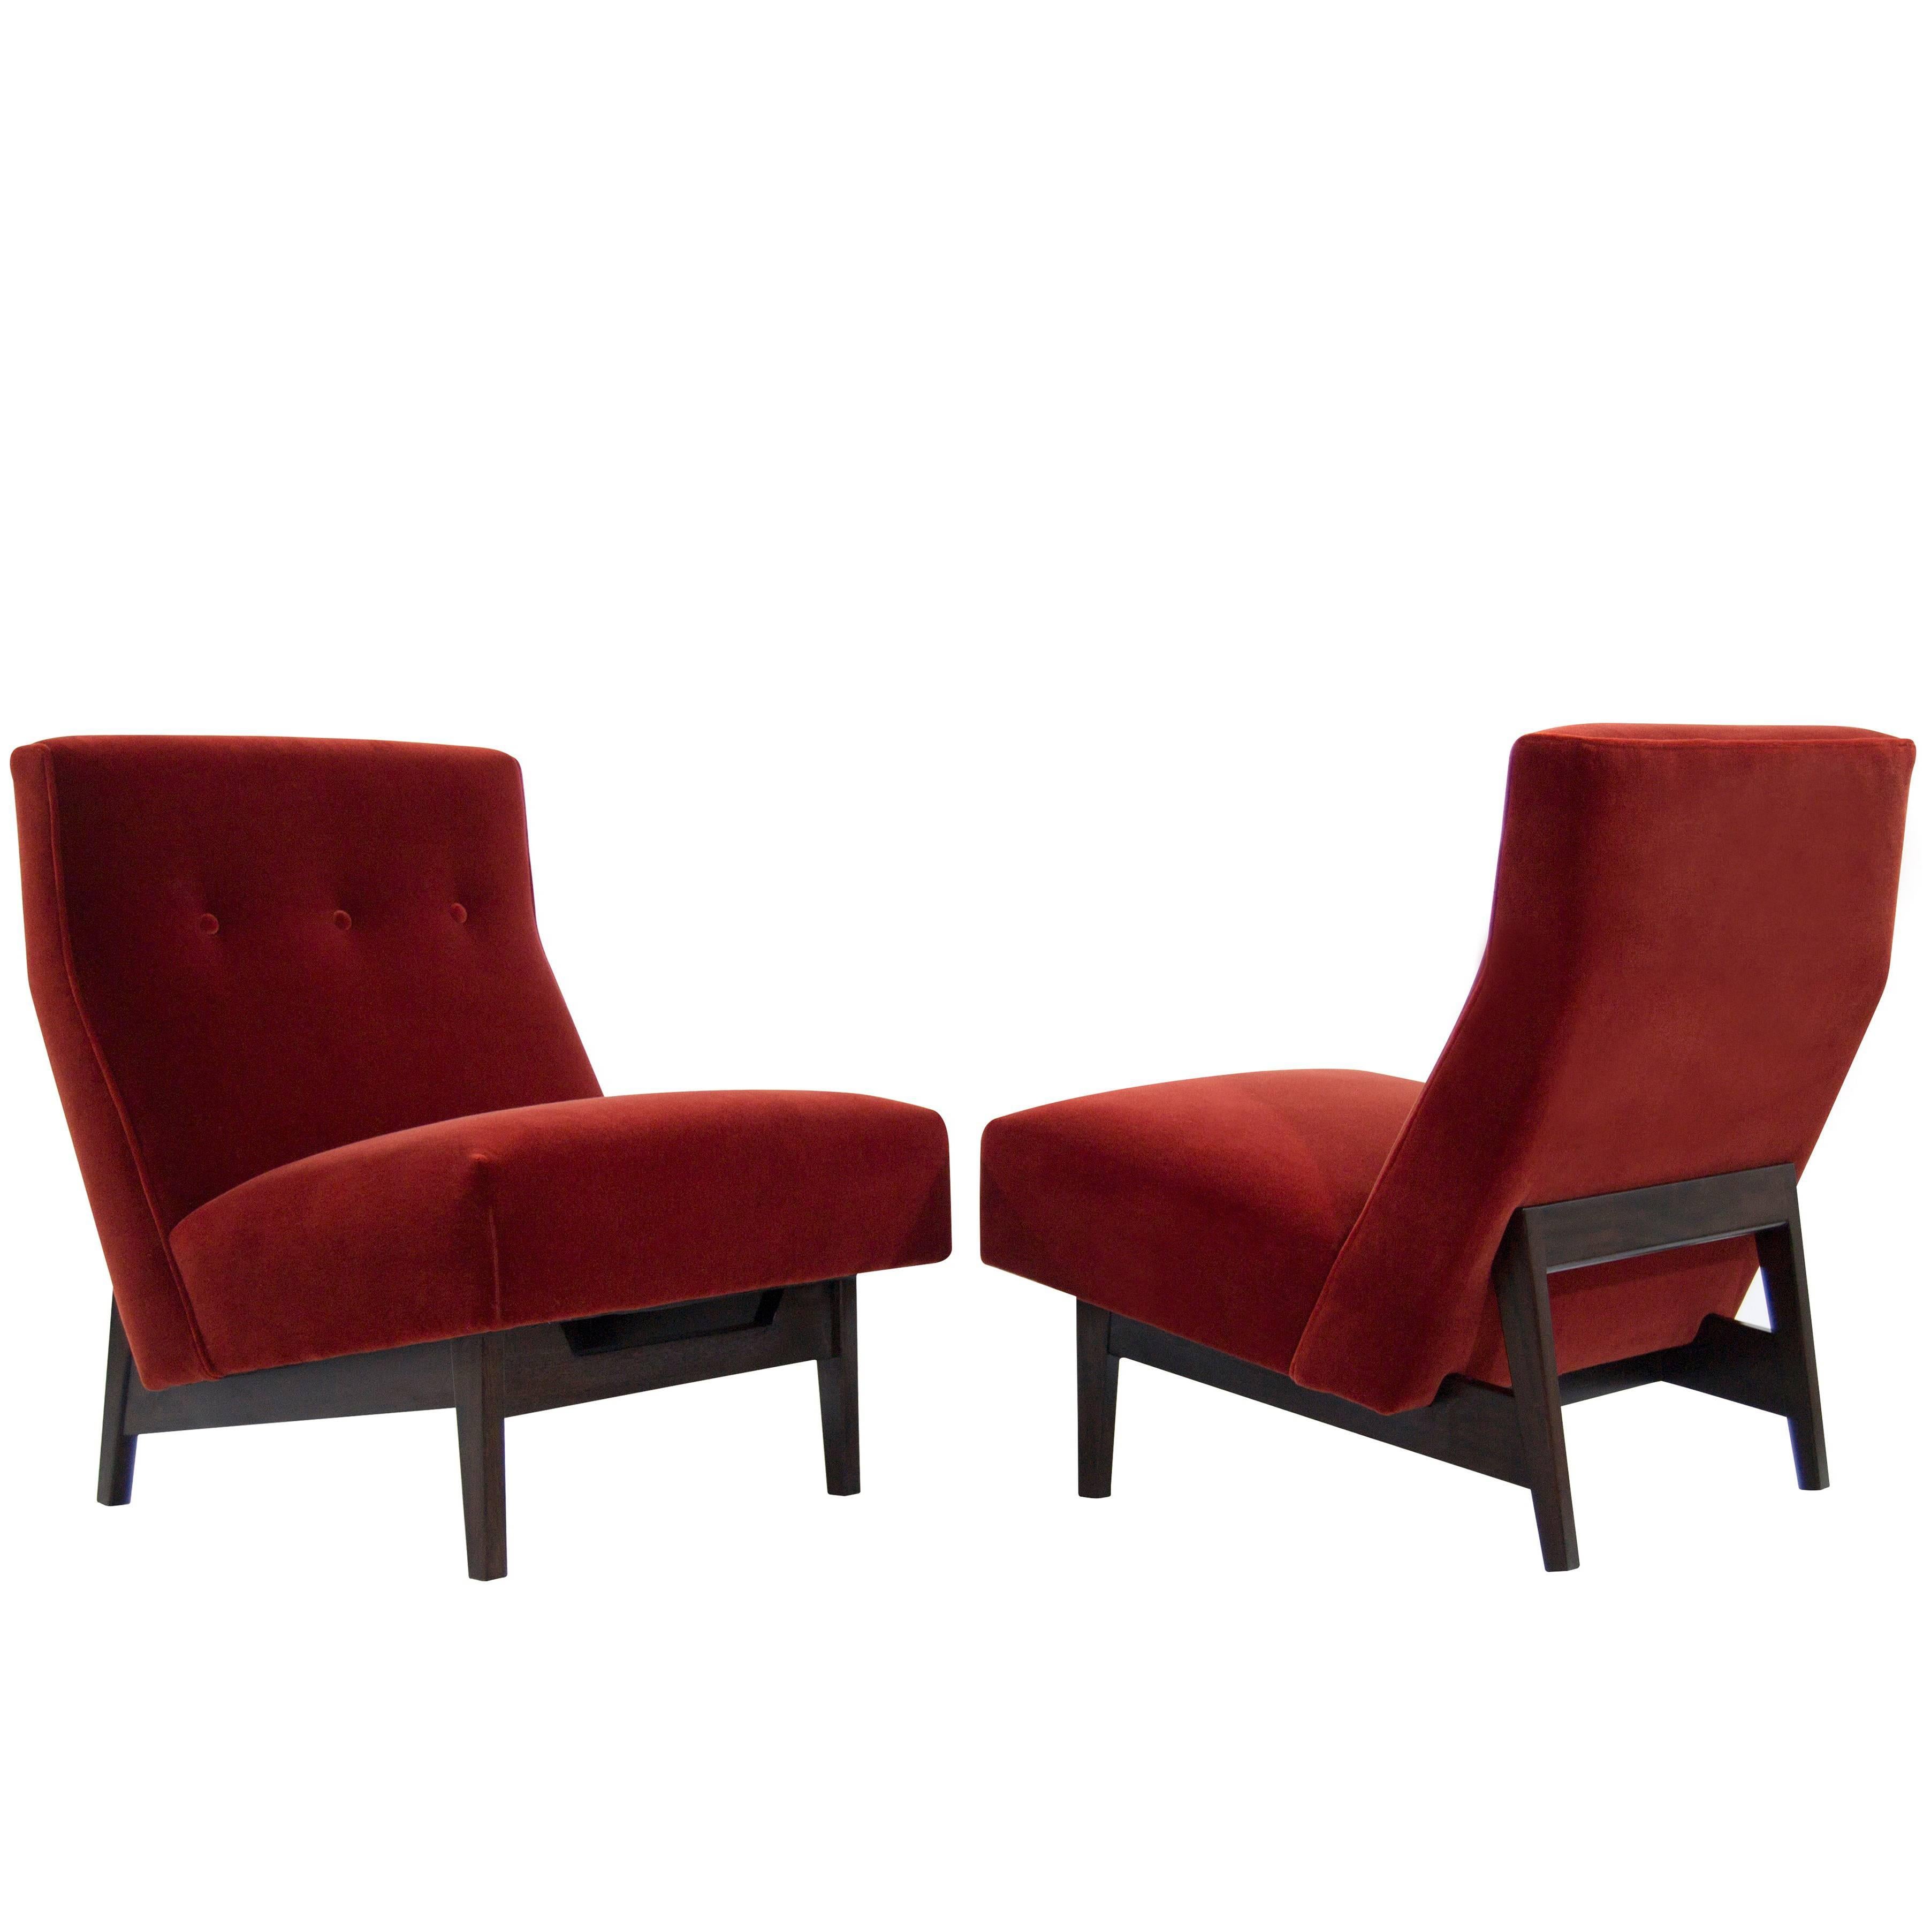 Jens Risom Slipper Chairs in Rust Red Mohair